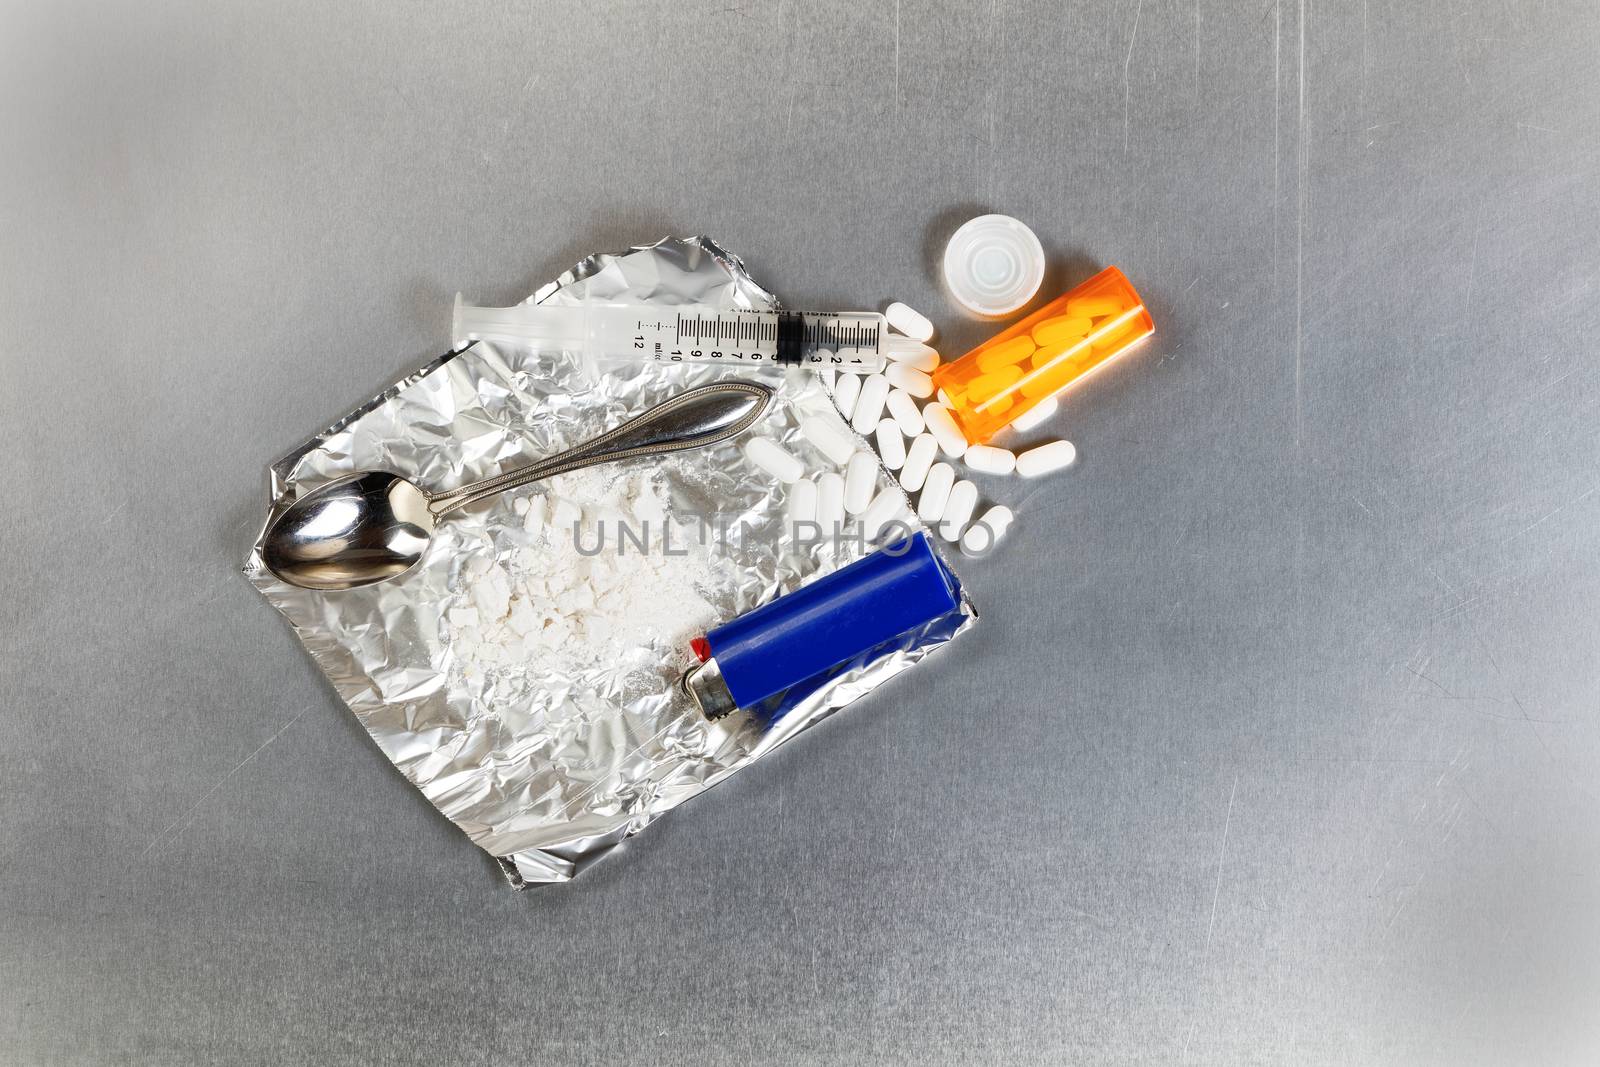 Crushed painkiller pills and other objects being prepared for dr by tab1962